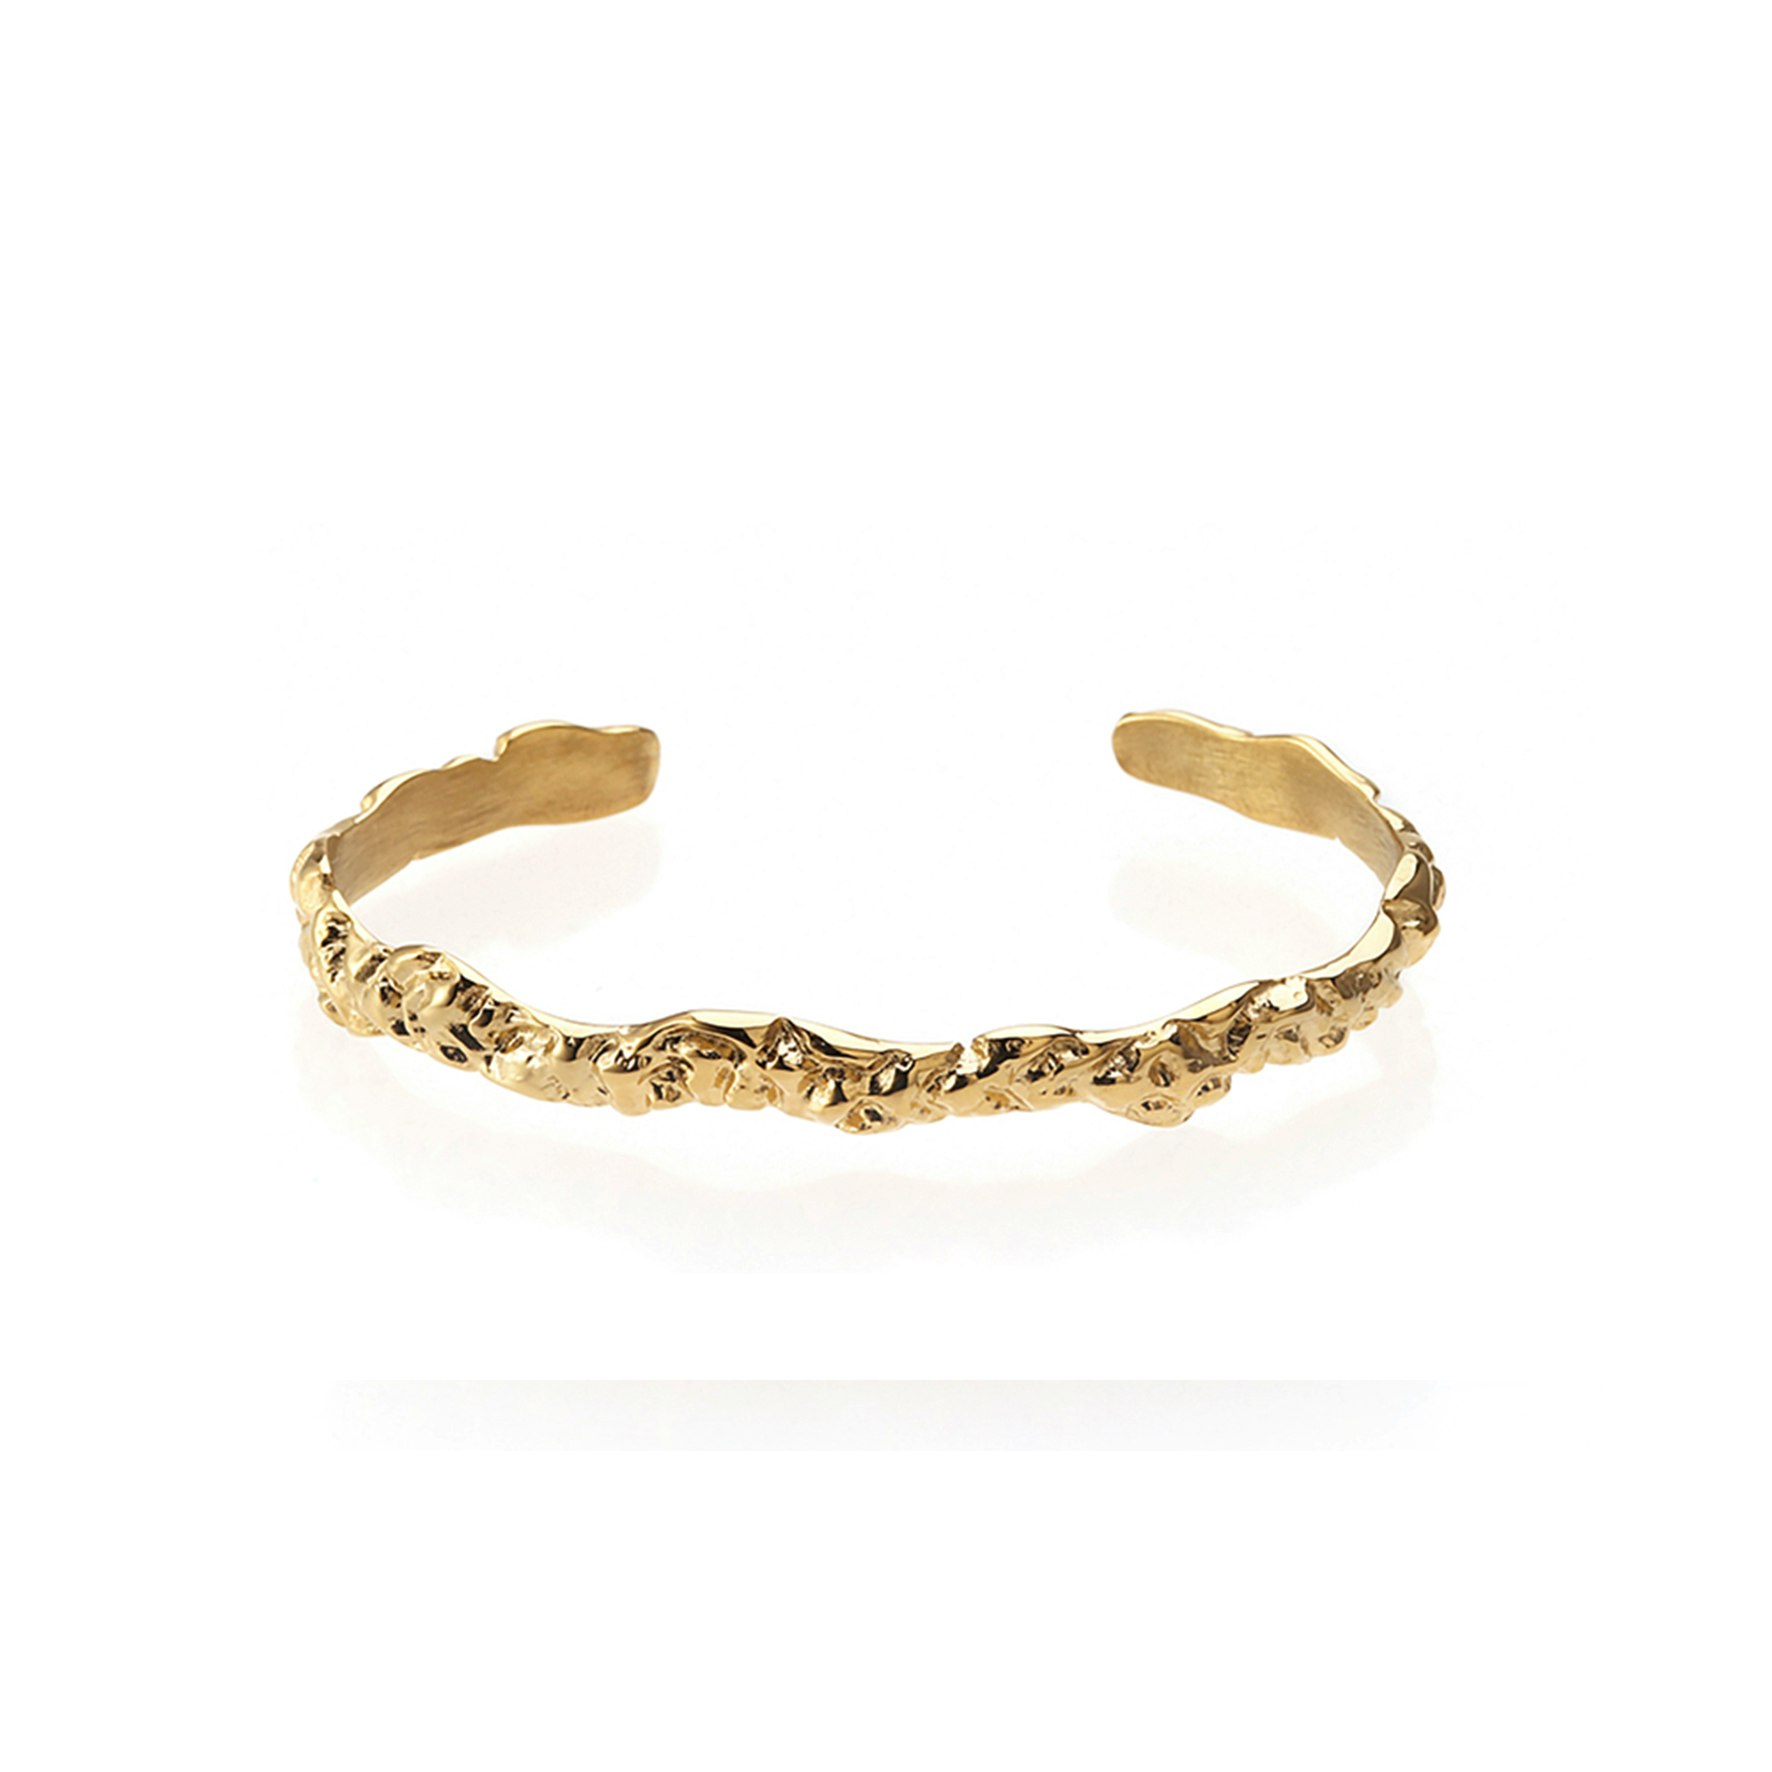 Xenia x Sistie 2nd Bracelet from Sistie 2nd in Goldplated stainless steel